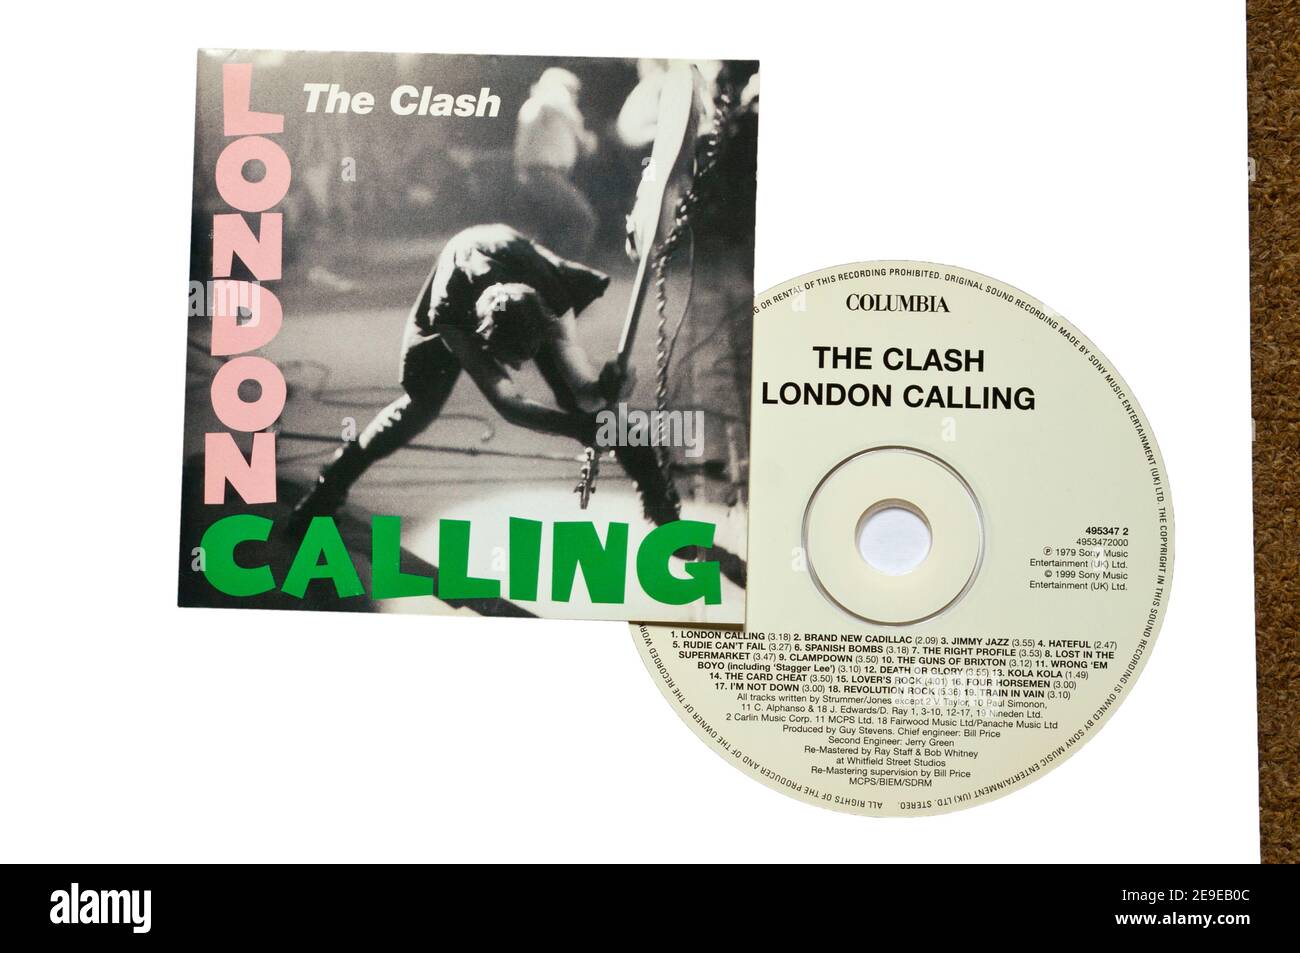 The Clash London Calling Music CD Compact Disc Stock Photo